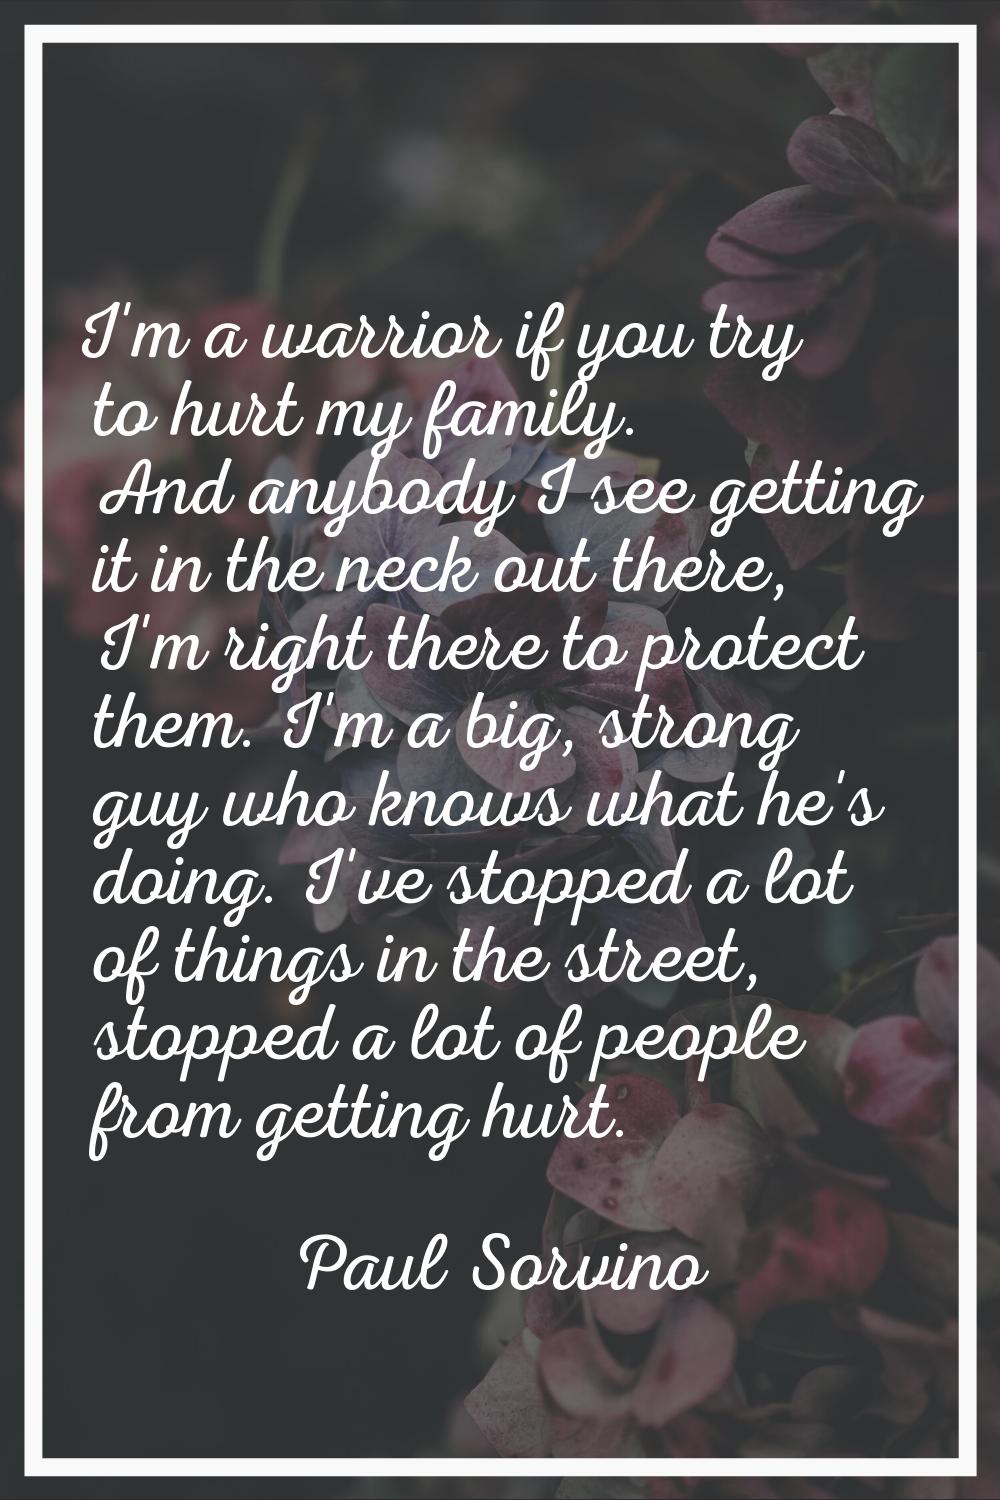 I'm a warrior if you try to hurt my family. And anybody I see getting it in the neck out there, I'm